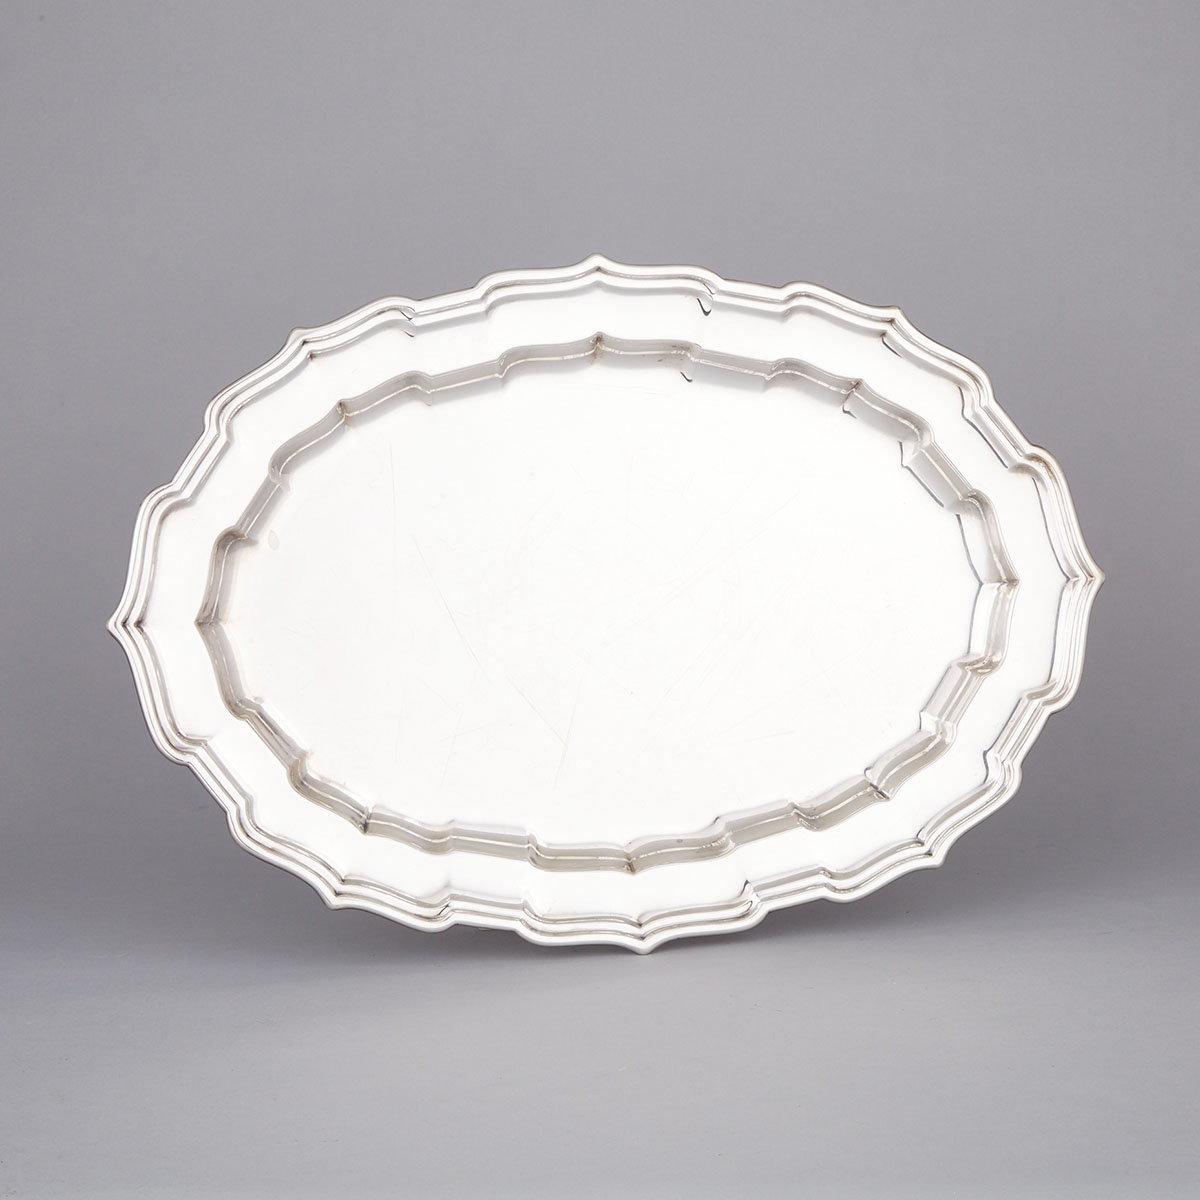 American Silver ‘Chippendale’ Oval Platter, Frank W. Smith Silver Co., Gardner, Mass., 20th century